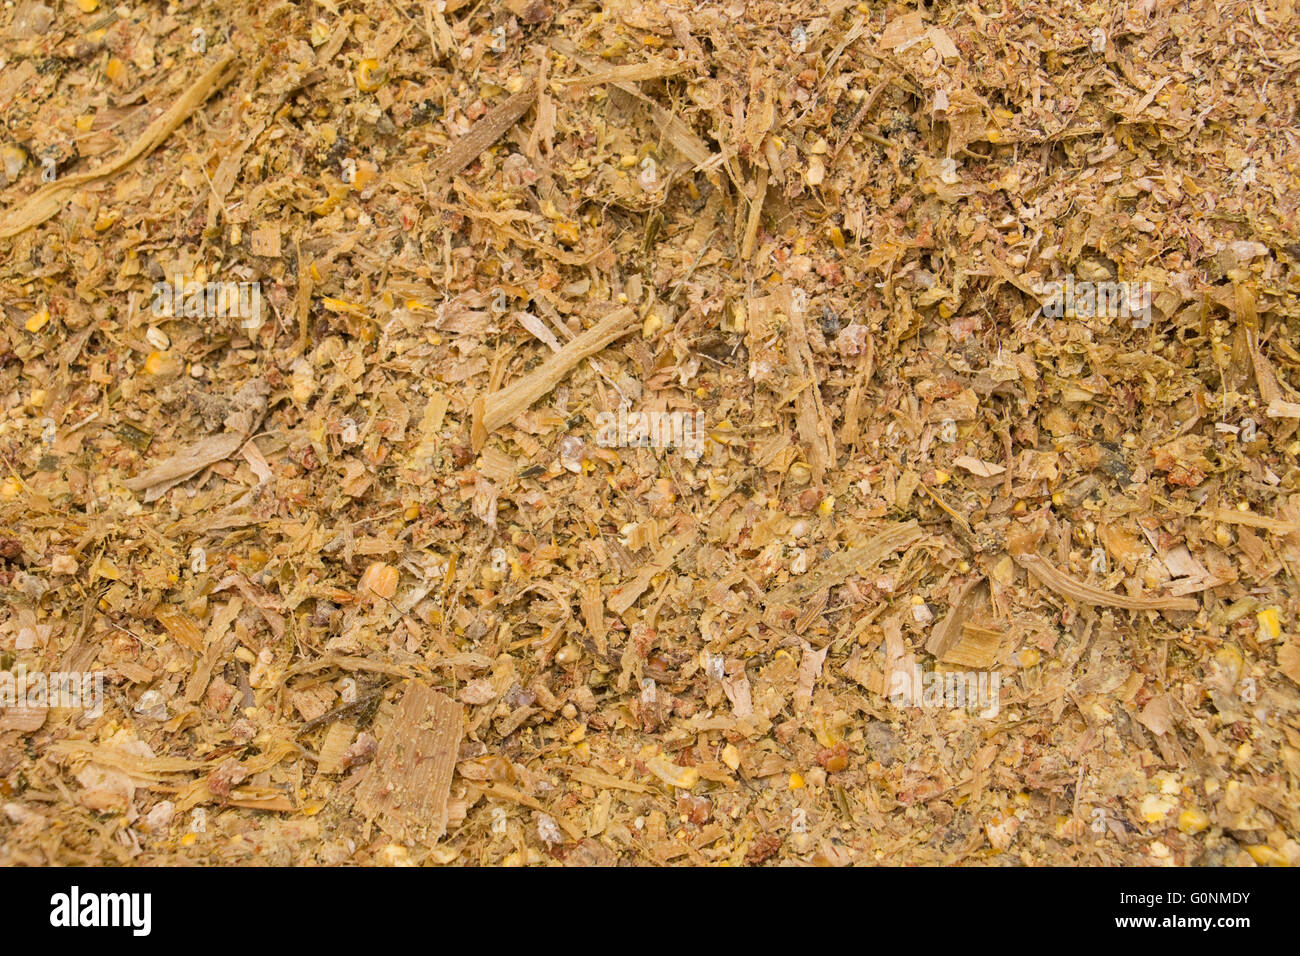 Maize silage on a dairy farm in Northern Italy Stock Photo